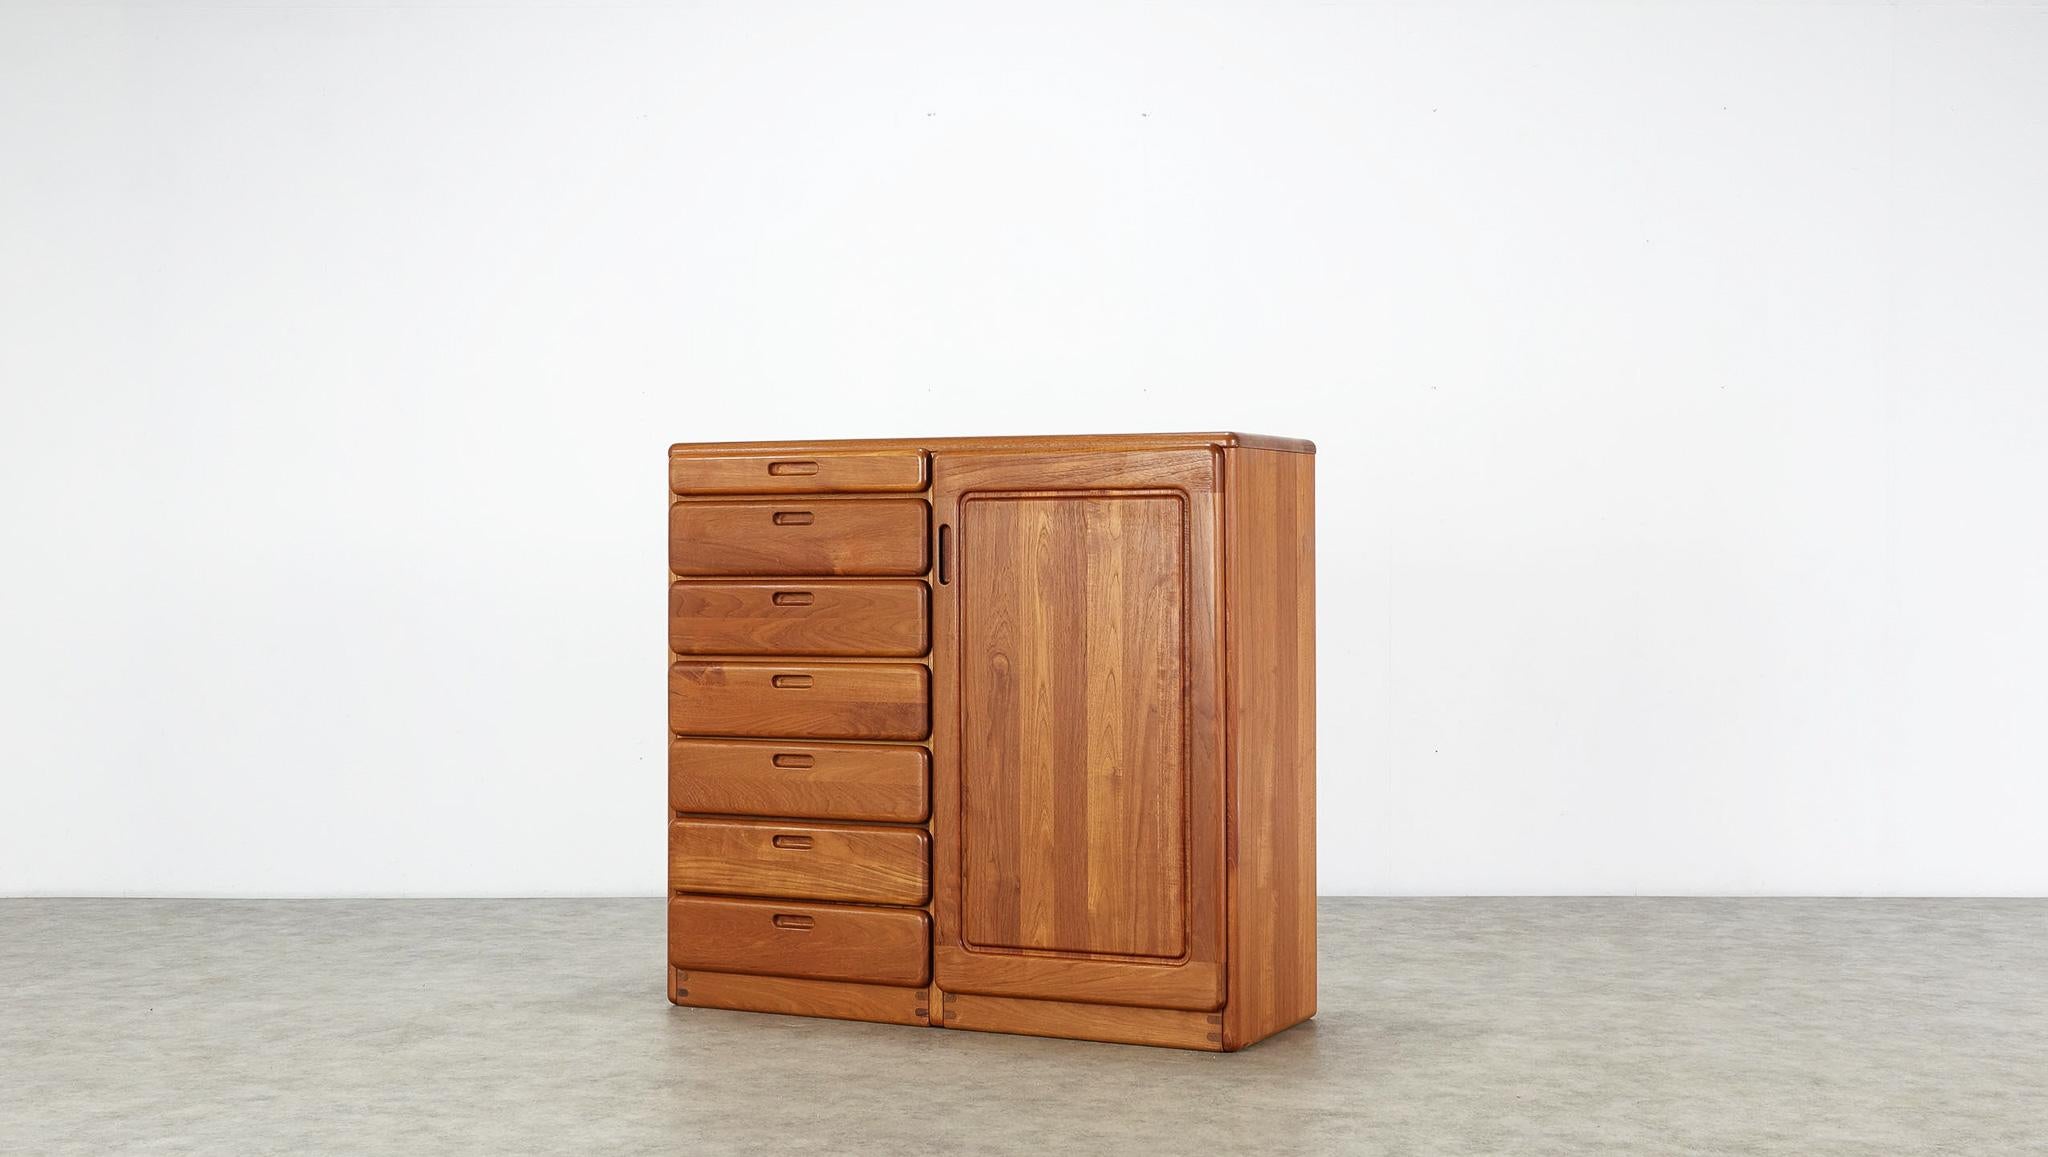 Do you need drawers? This very stylish and high quality chest of drawers has 7 of them!!! There are 7 drawers on the left side and 3 compartments on the right side. 

Beautiful, solid teak wood, made in Denmark. Elegant Scandinavian design. I love